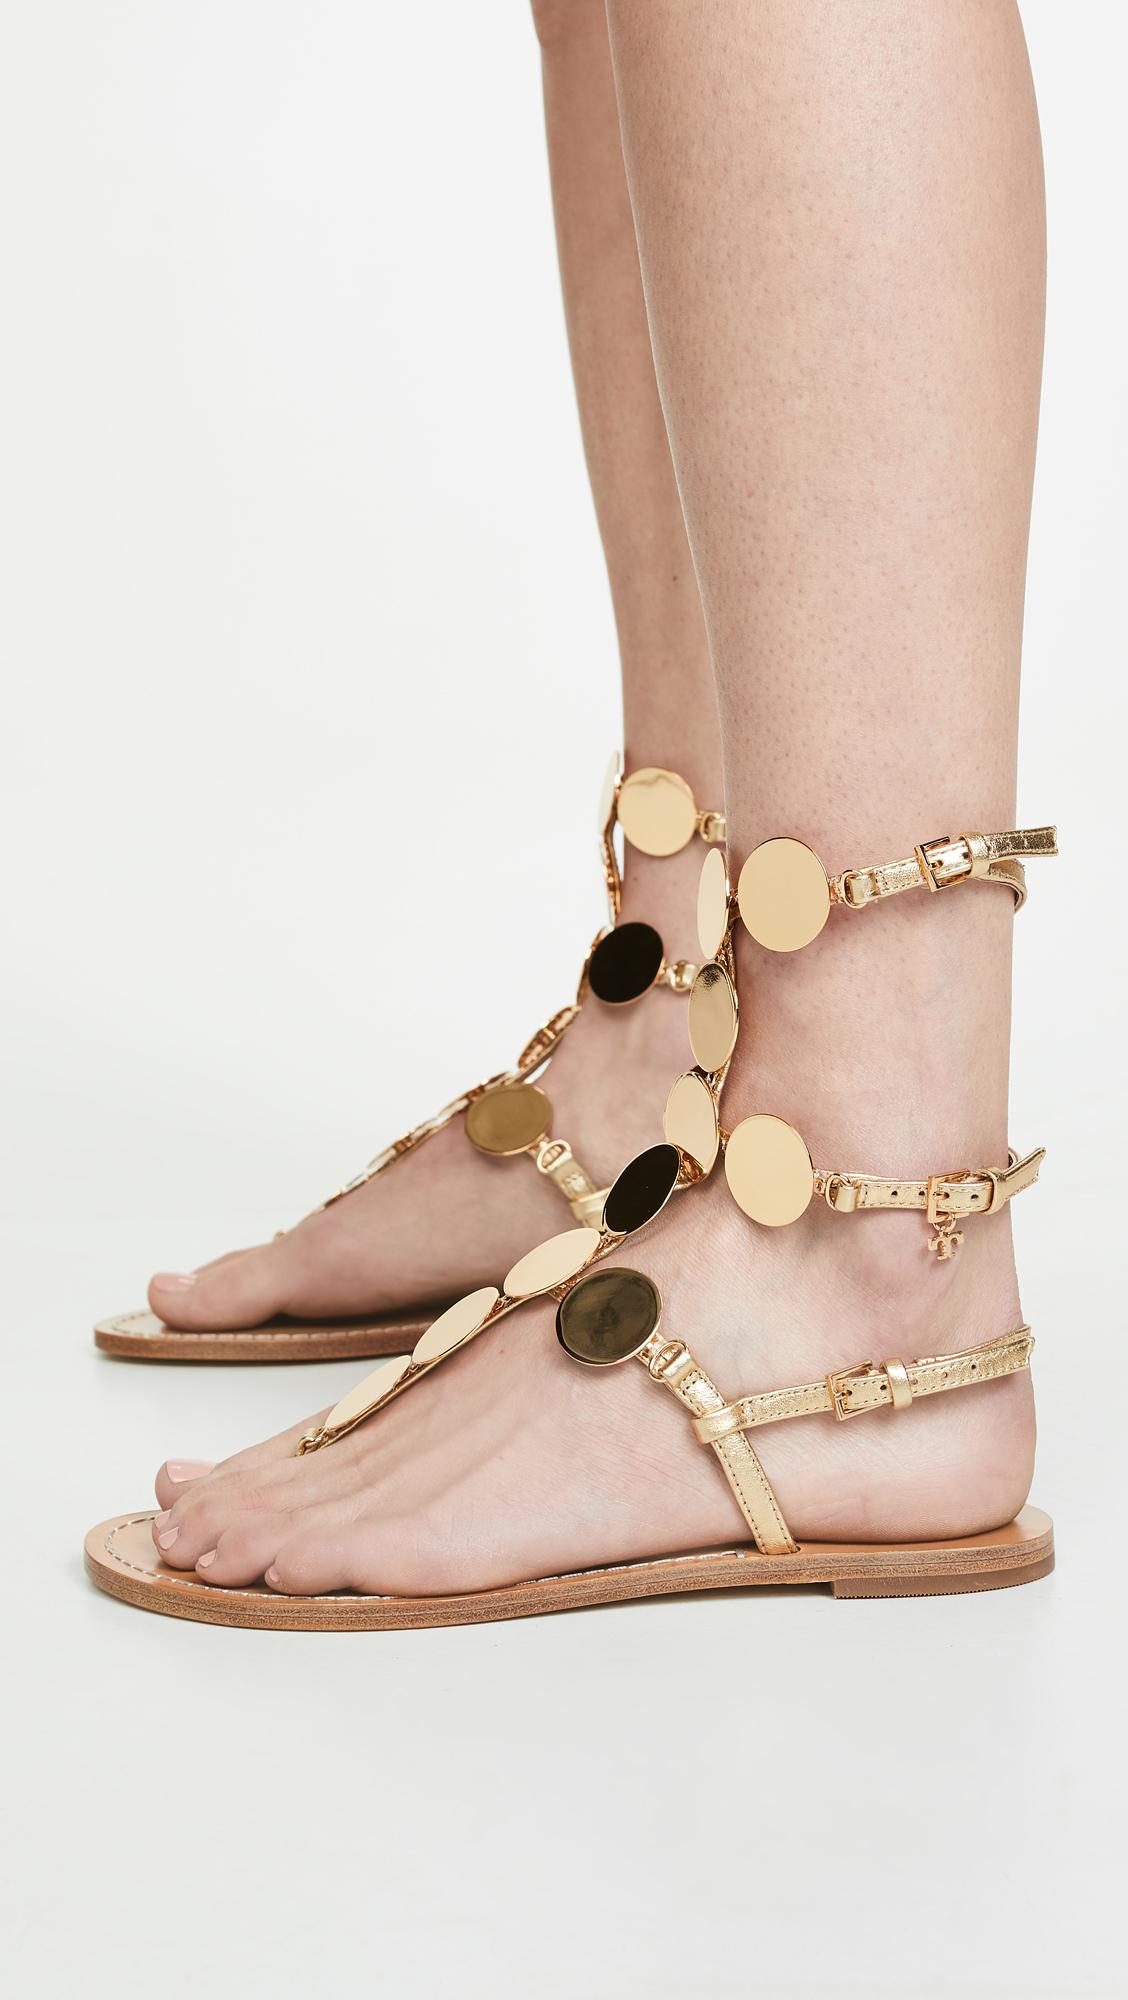 Tory Burch Leather Patos Disk Gladiator Sandal in Gold/ Gold (Metallic) -  Lyst